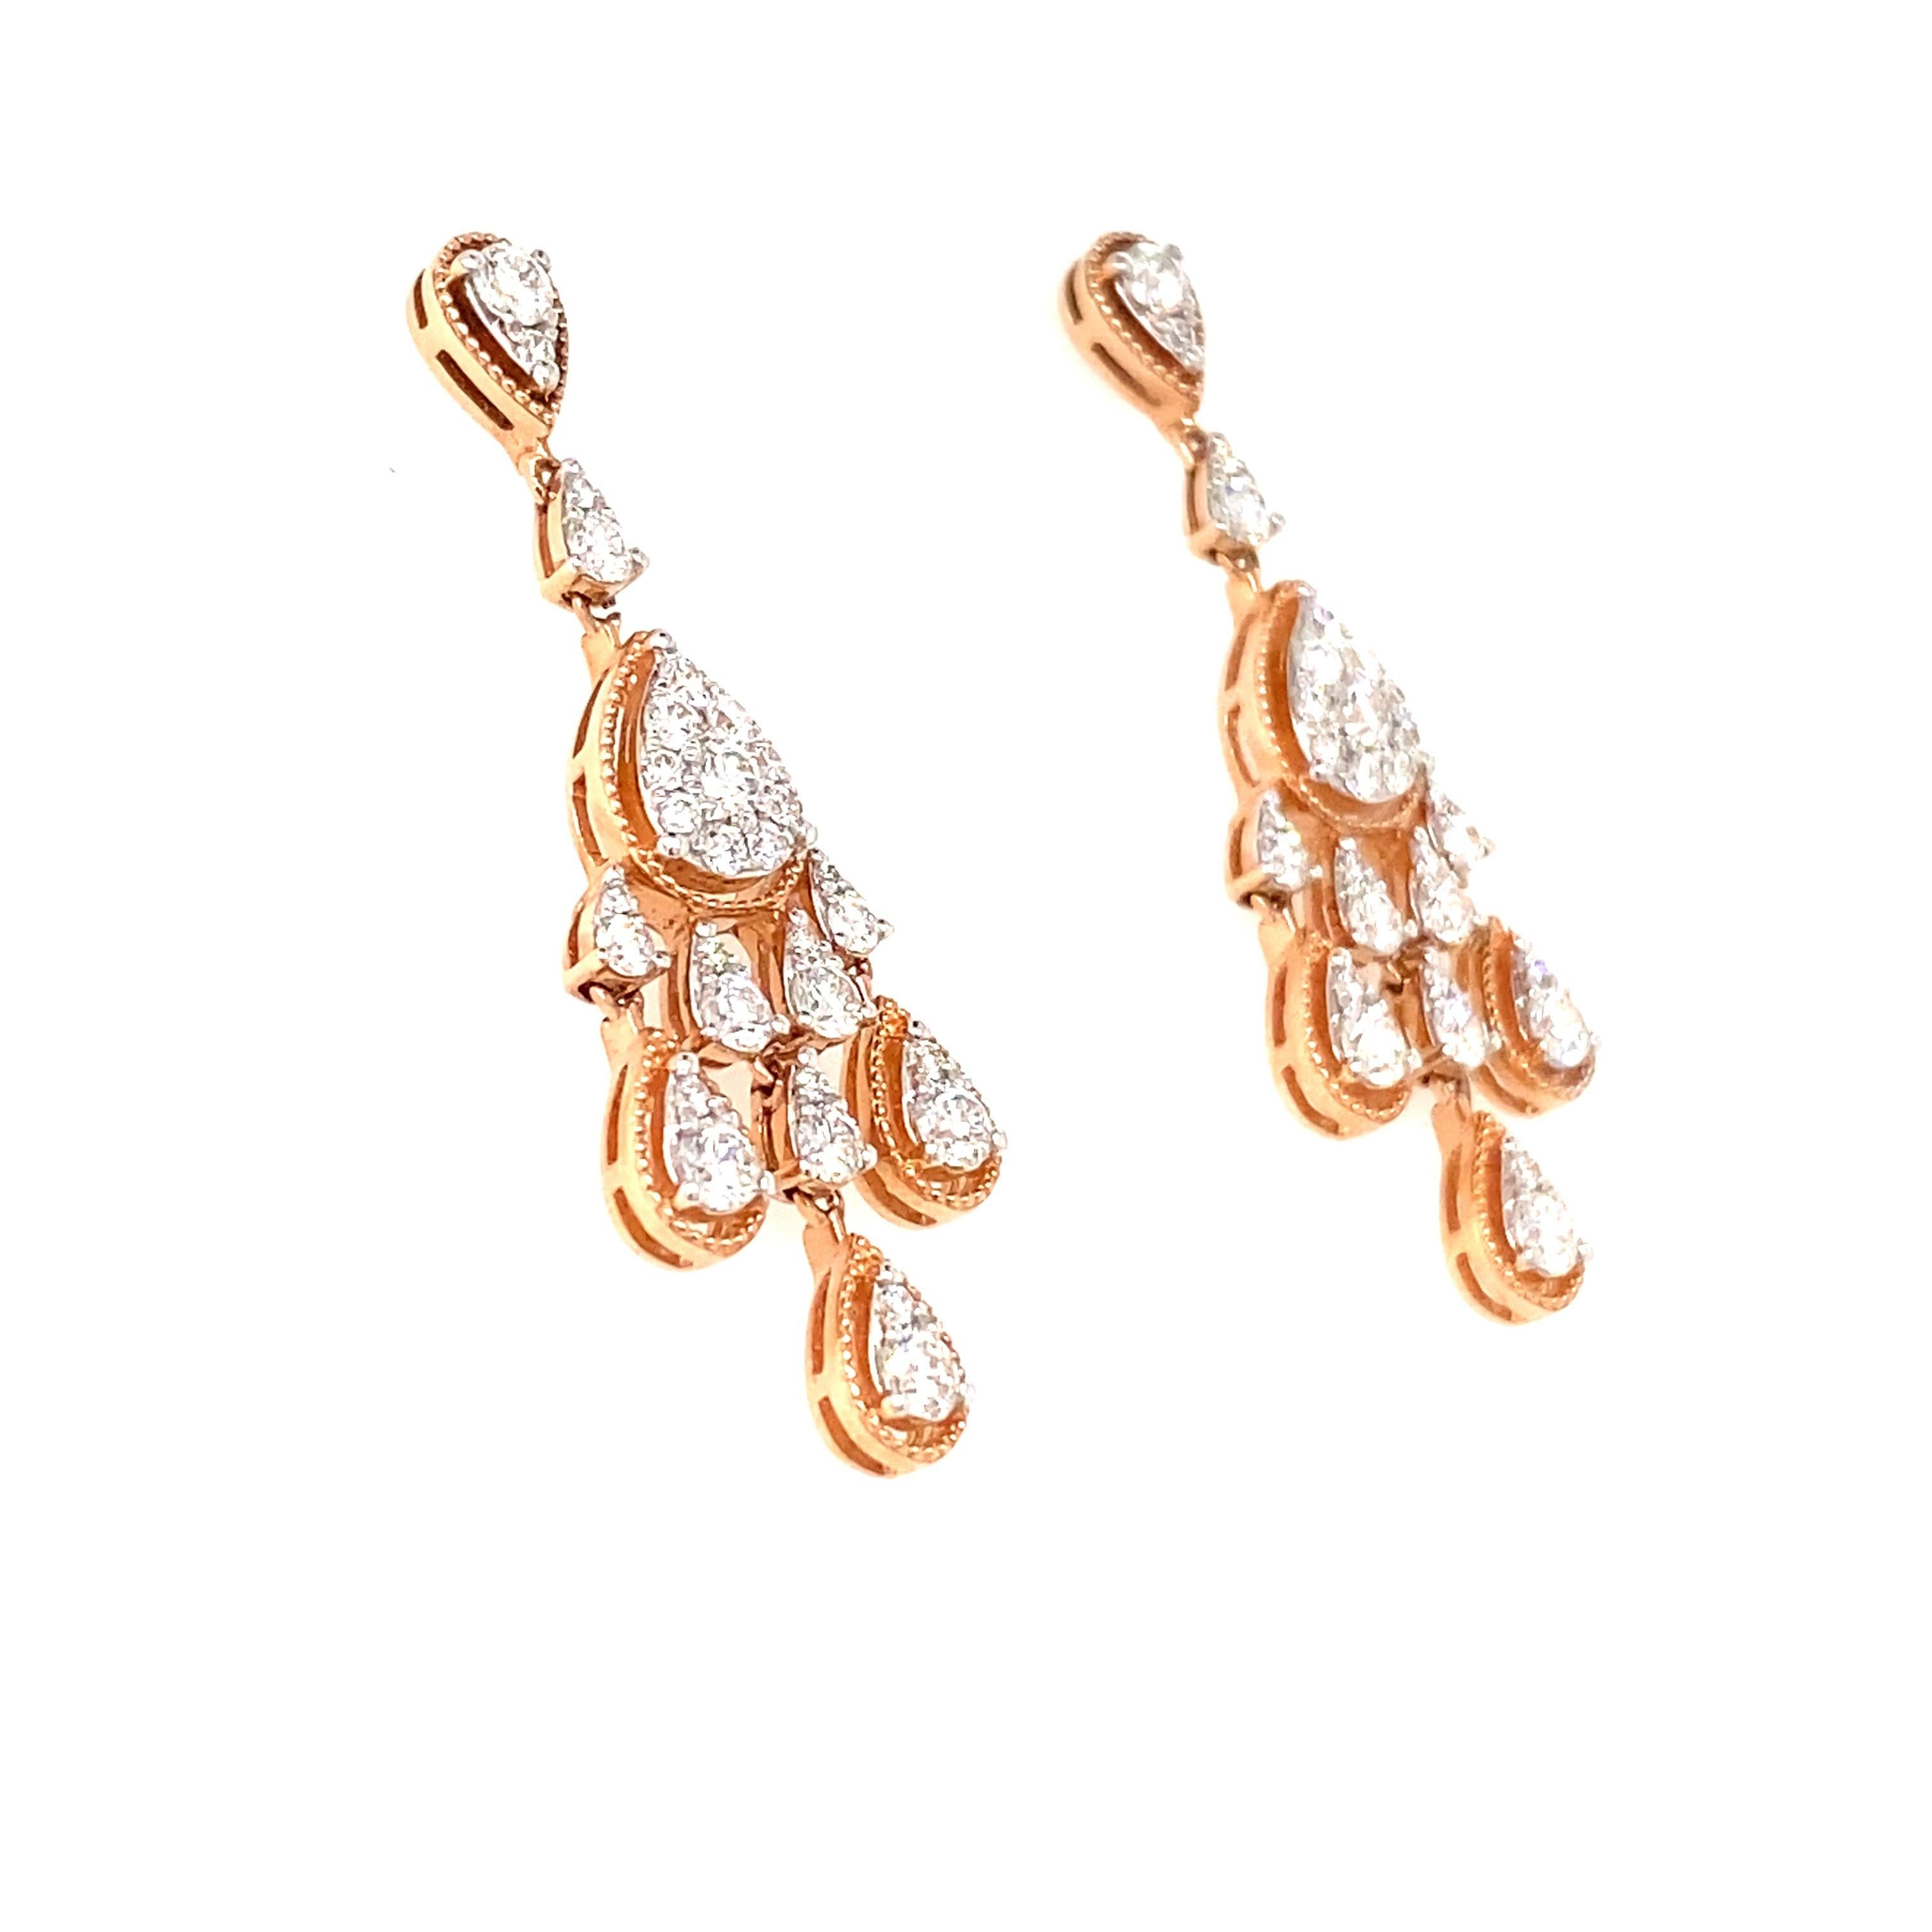 14KT Diamonds framed in Rose & White Gold  Earrings.

Chandelier Drop Earrings  with elegant  Diamond drops which shimmer when you gracefully move. 

60 Round Brilliant Diamonds .32 Carat Total Weight  H-I/I.
Post  Back 